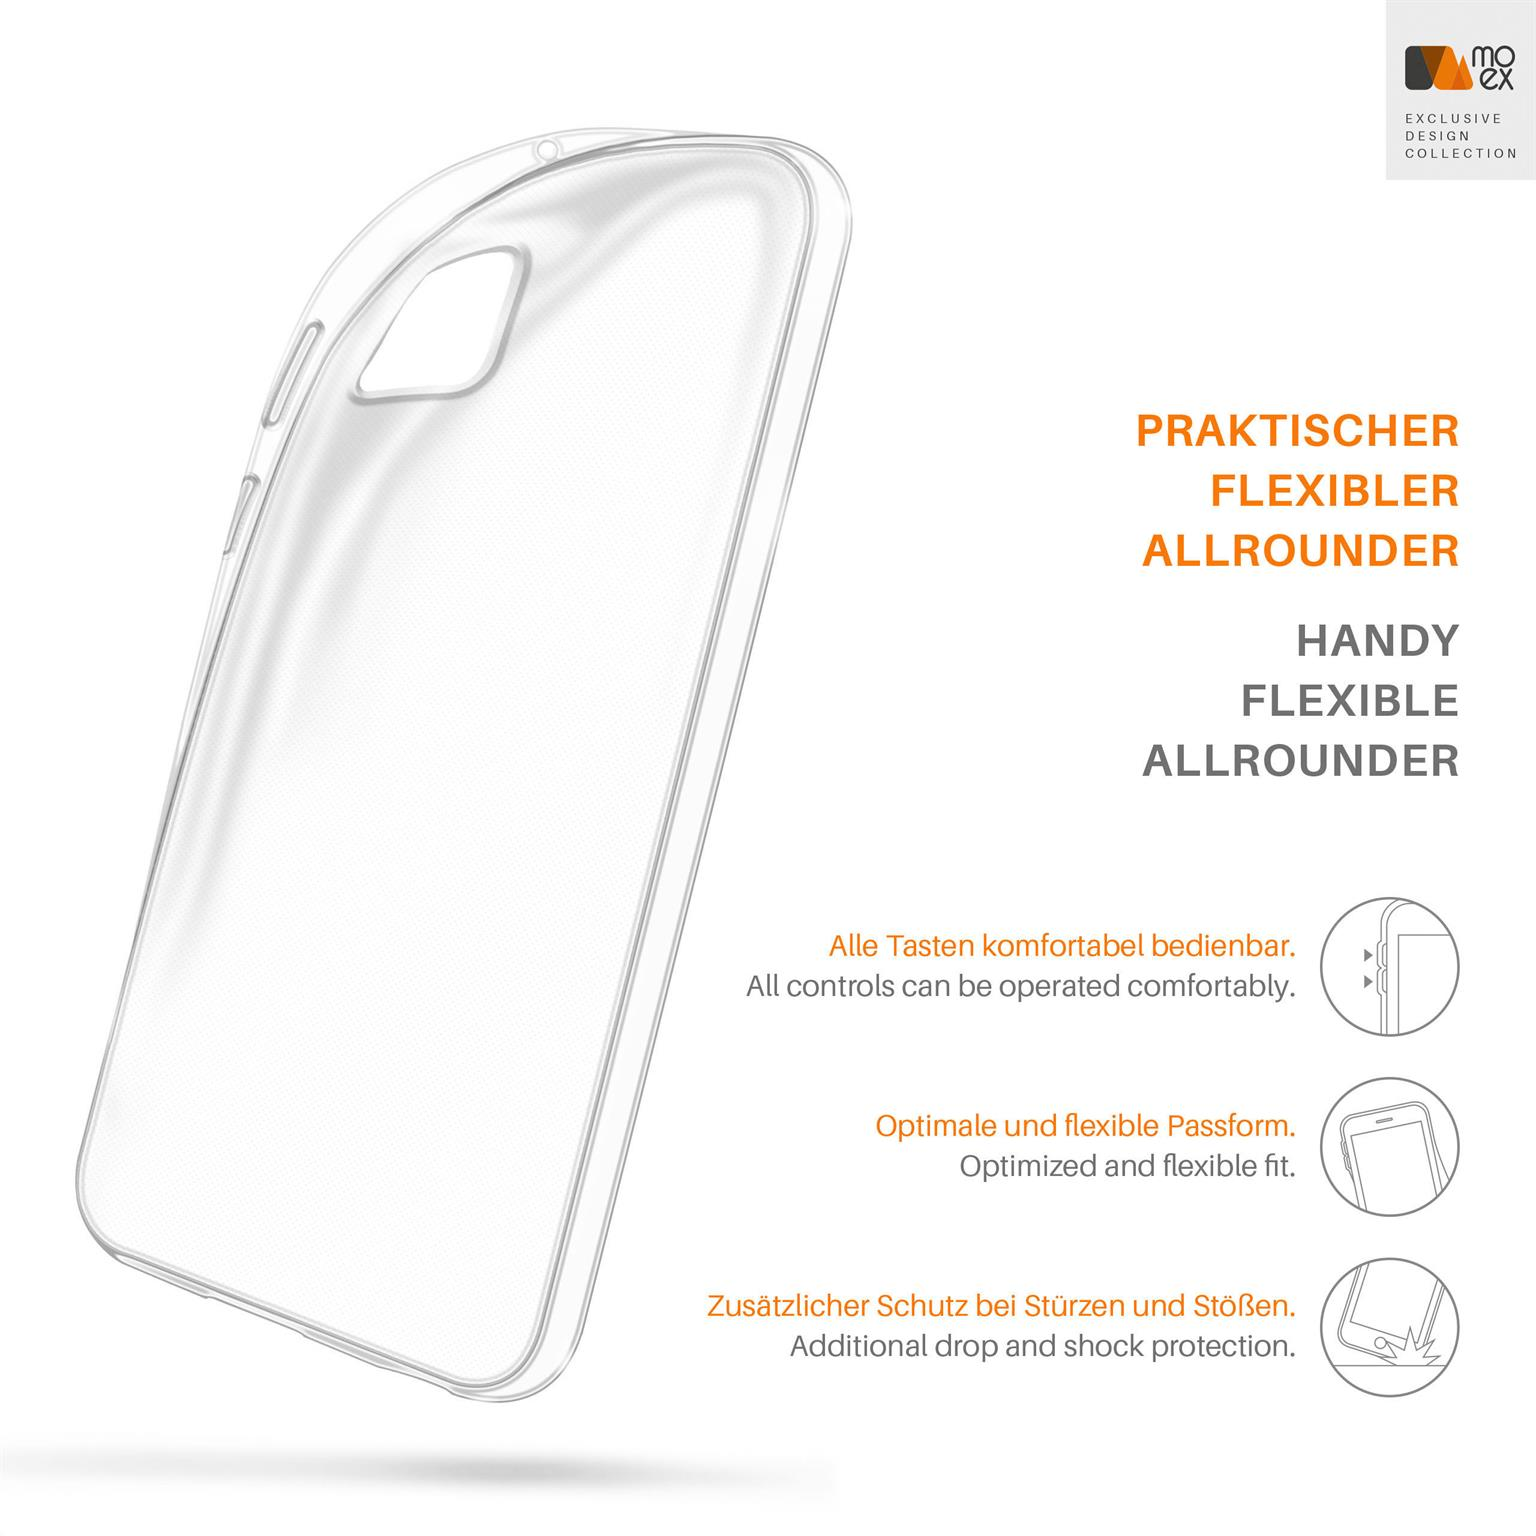 Backcover, Aero Case, Google, Crystal-Clear XL, 4 Pixel MOEX